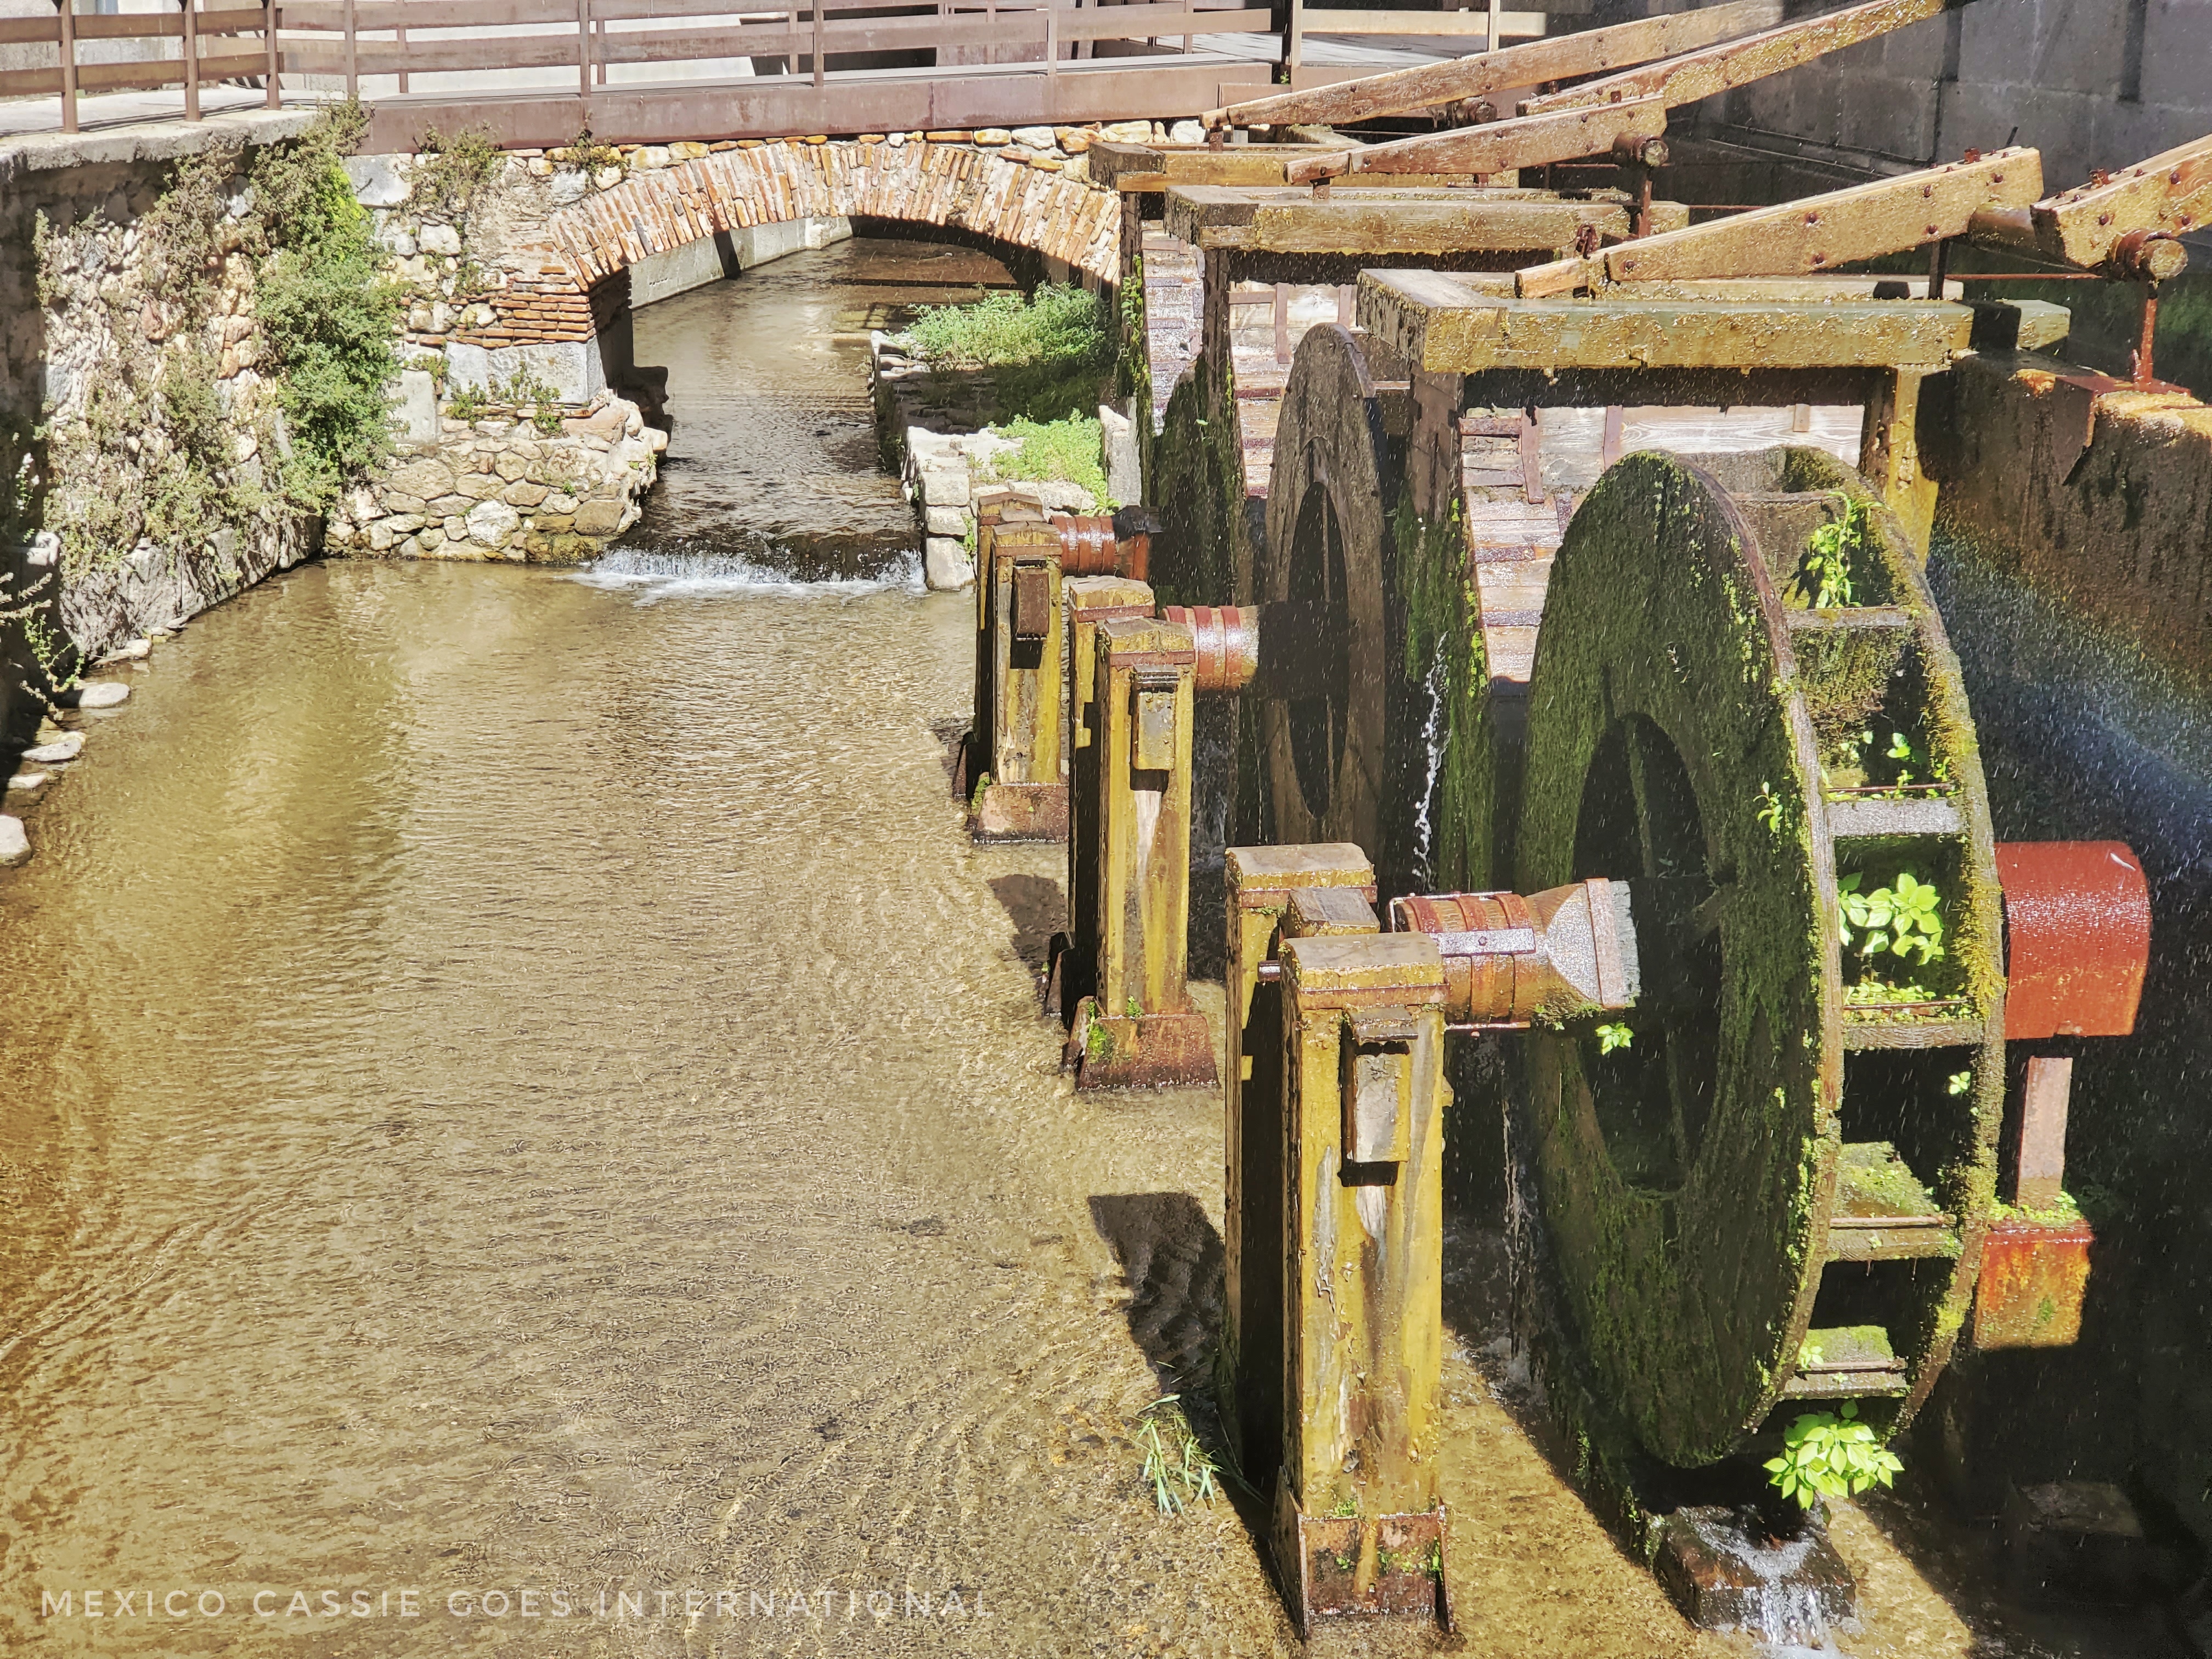 photo of water wheels in brown water. wheels covered in moss